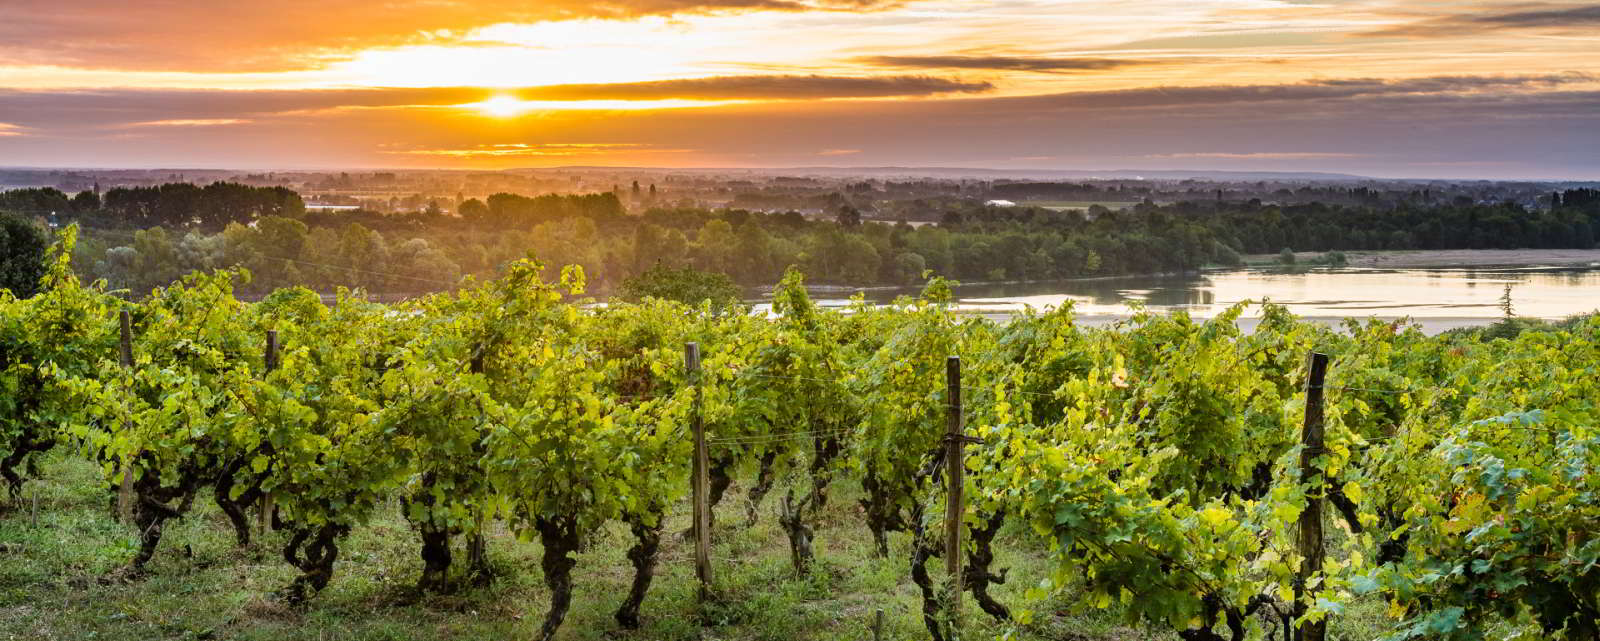 France Pays de la Loire Saumur Private Wine Tasting Tour. Pays de la Loire Luxury Holidays with In-Luxe Travel France, The specialist of luxury bespoke holidays in France since 2007